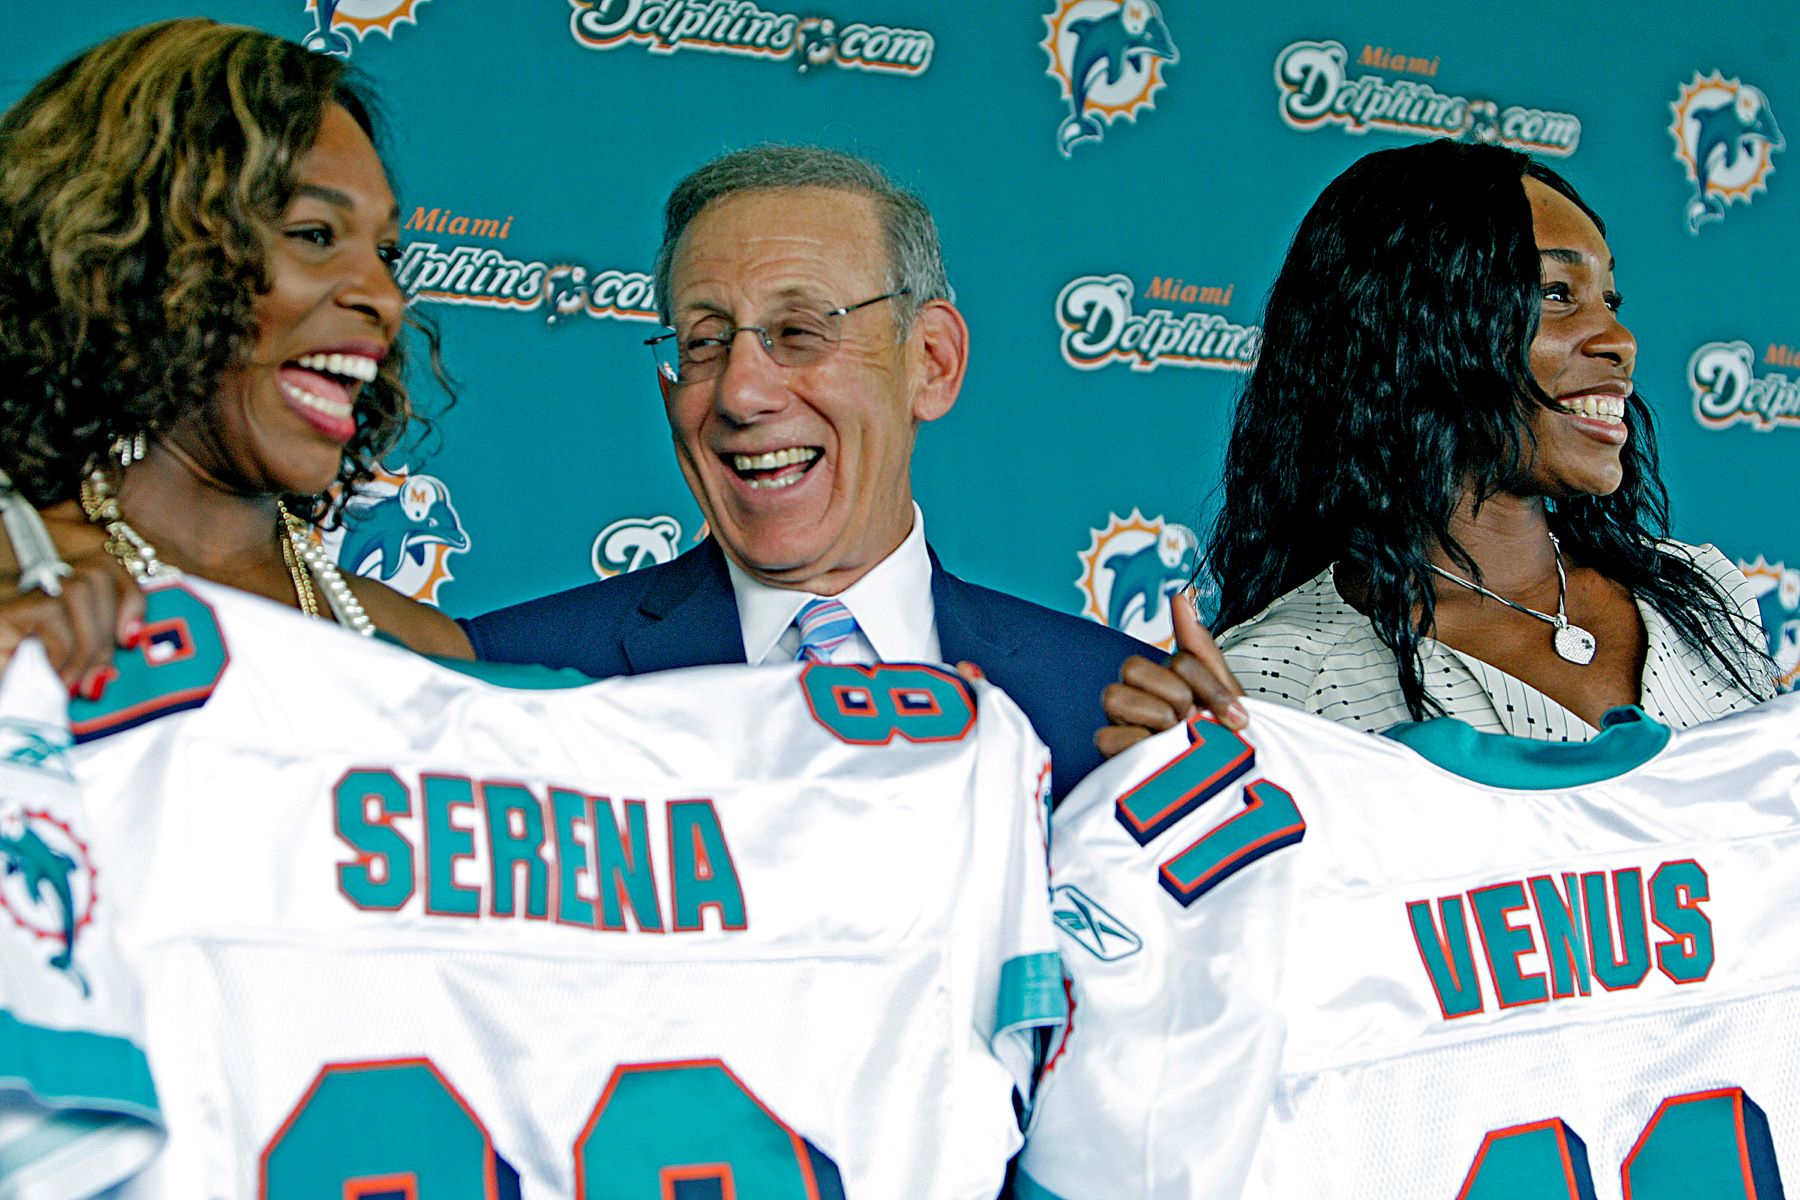 Serena and Venus Williams with Miami Dolphins owner Stephen Ross after the tennis pros ownership stake in the NFL team